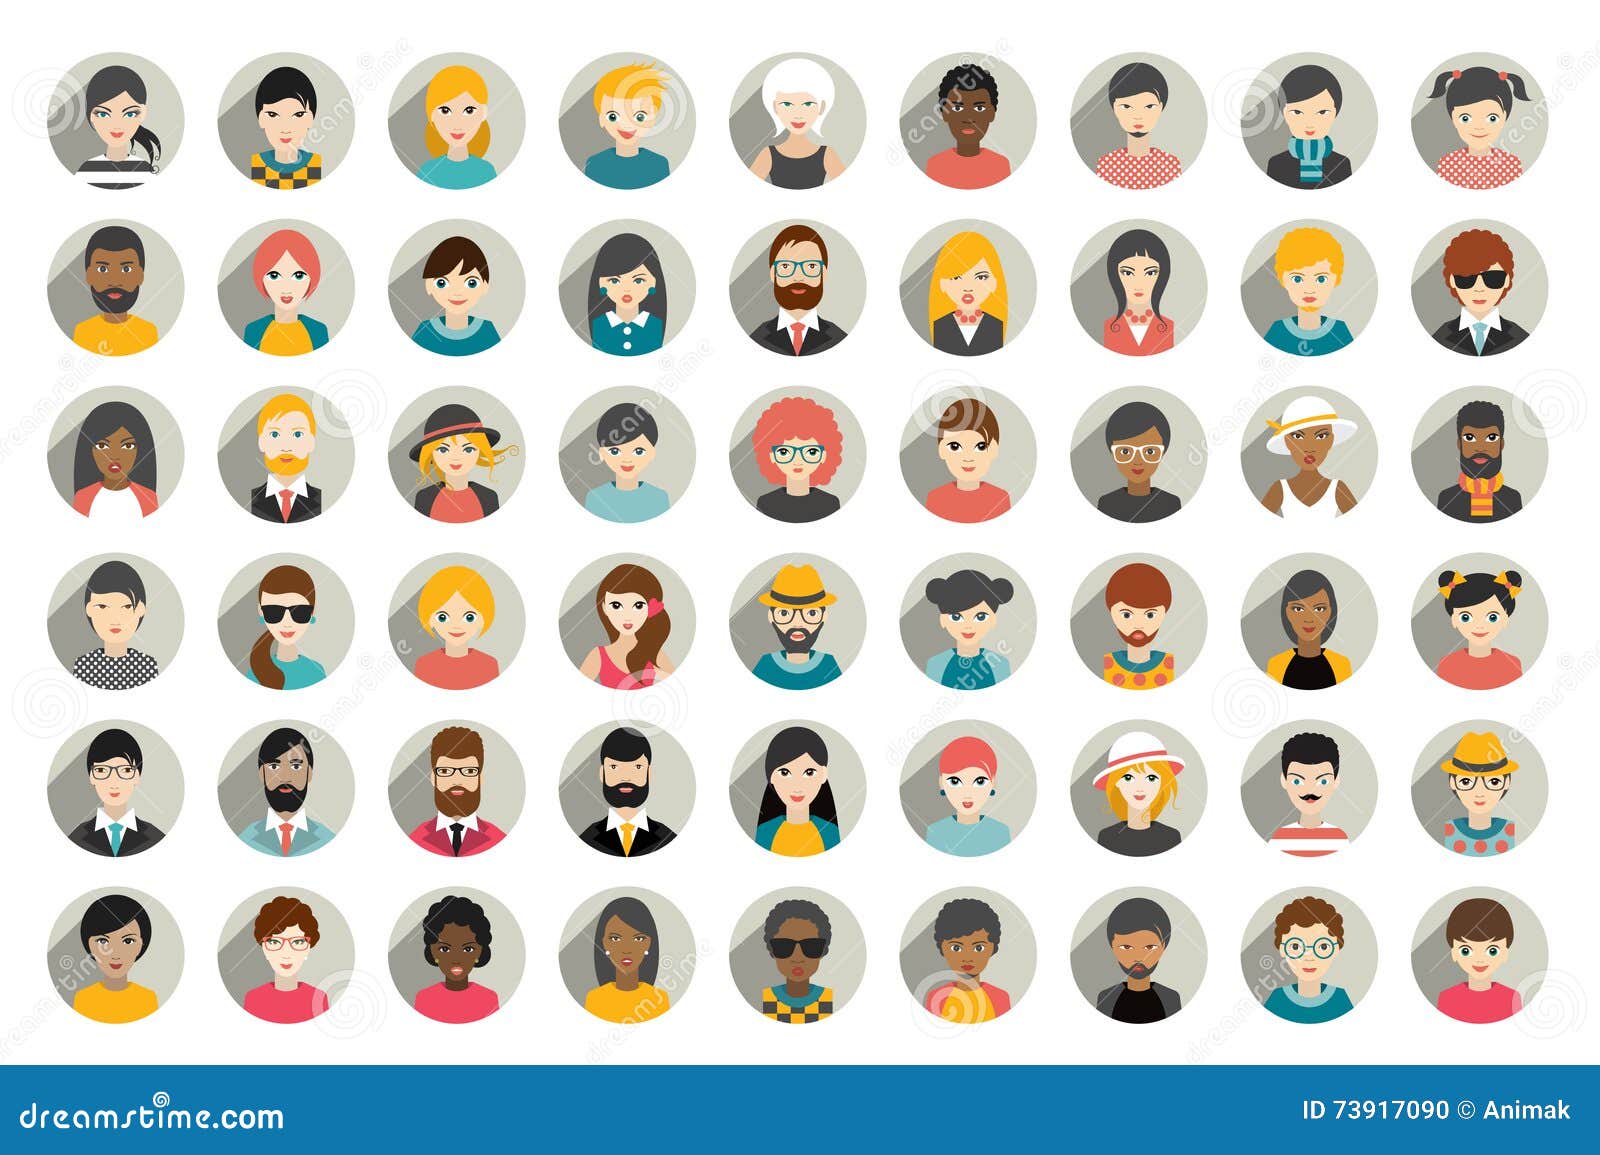 mega set of circle persons, avatars, people heads different nationality in flat style.